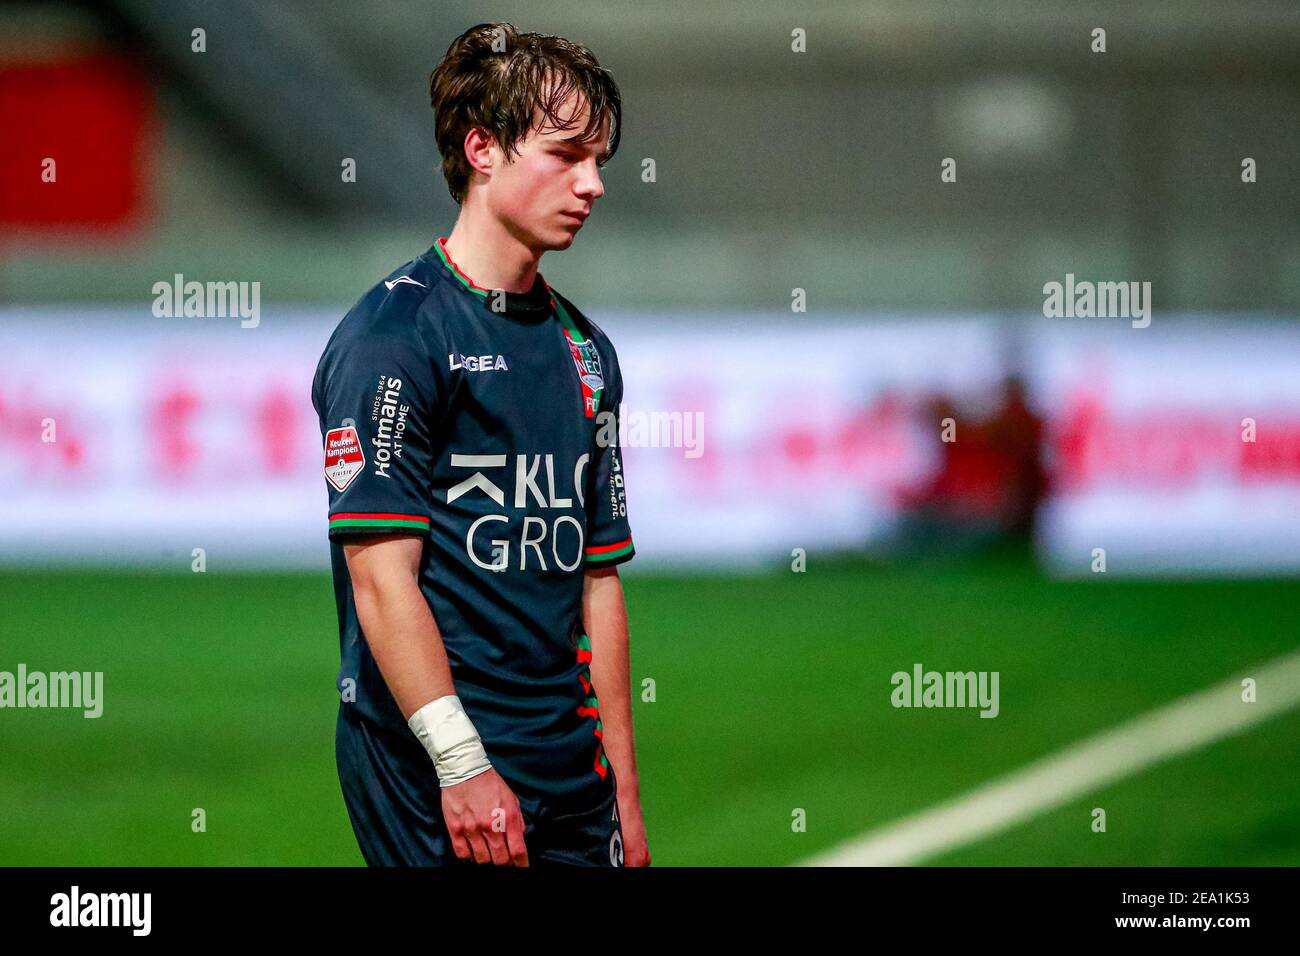 MAASTRICHT, NETHERLANDS - FEBRUARY 6: Dirk Proper of NEC disappointed during the Dutch Keukenkampioendivisie match between MVV and NEC at De Geusselt Stock Photo